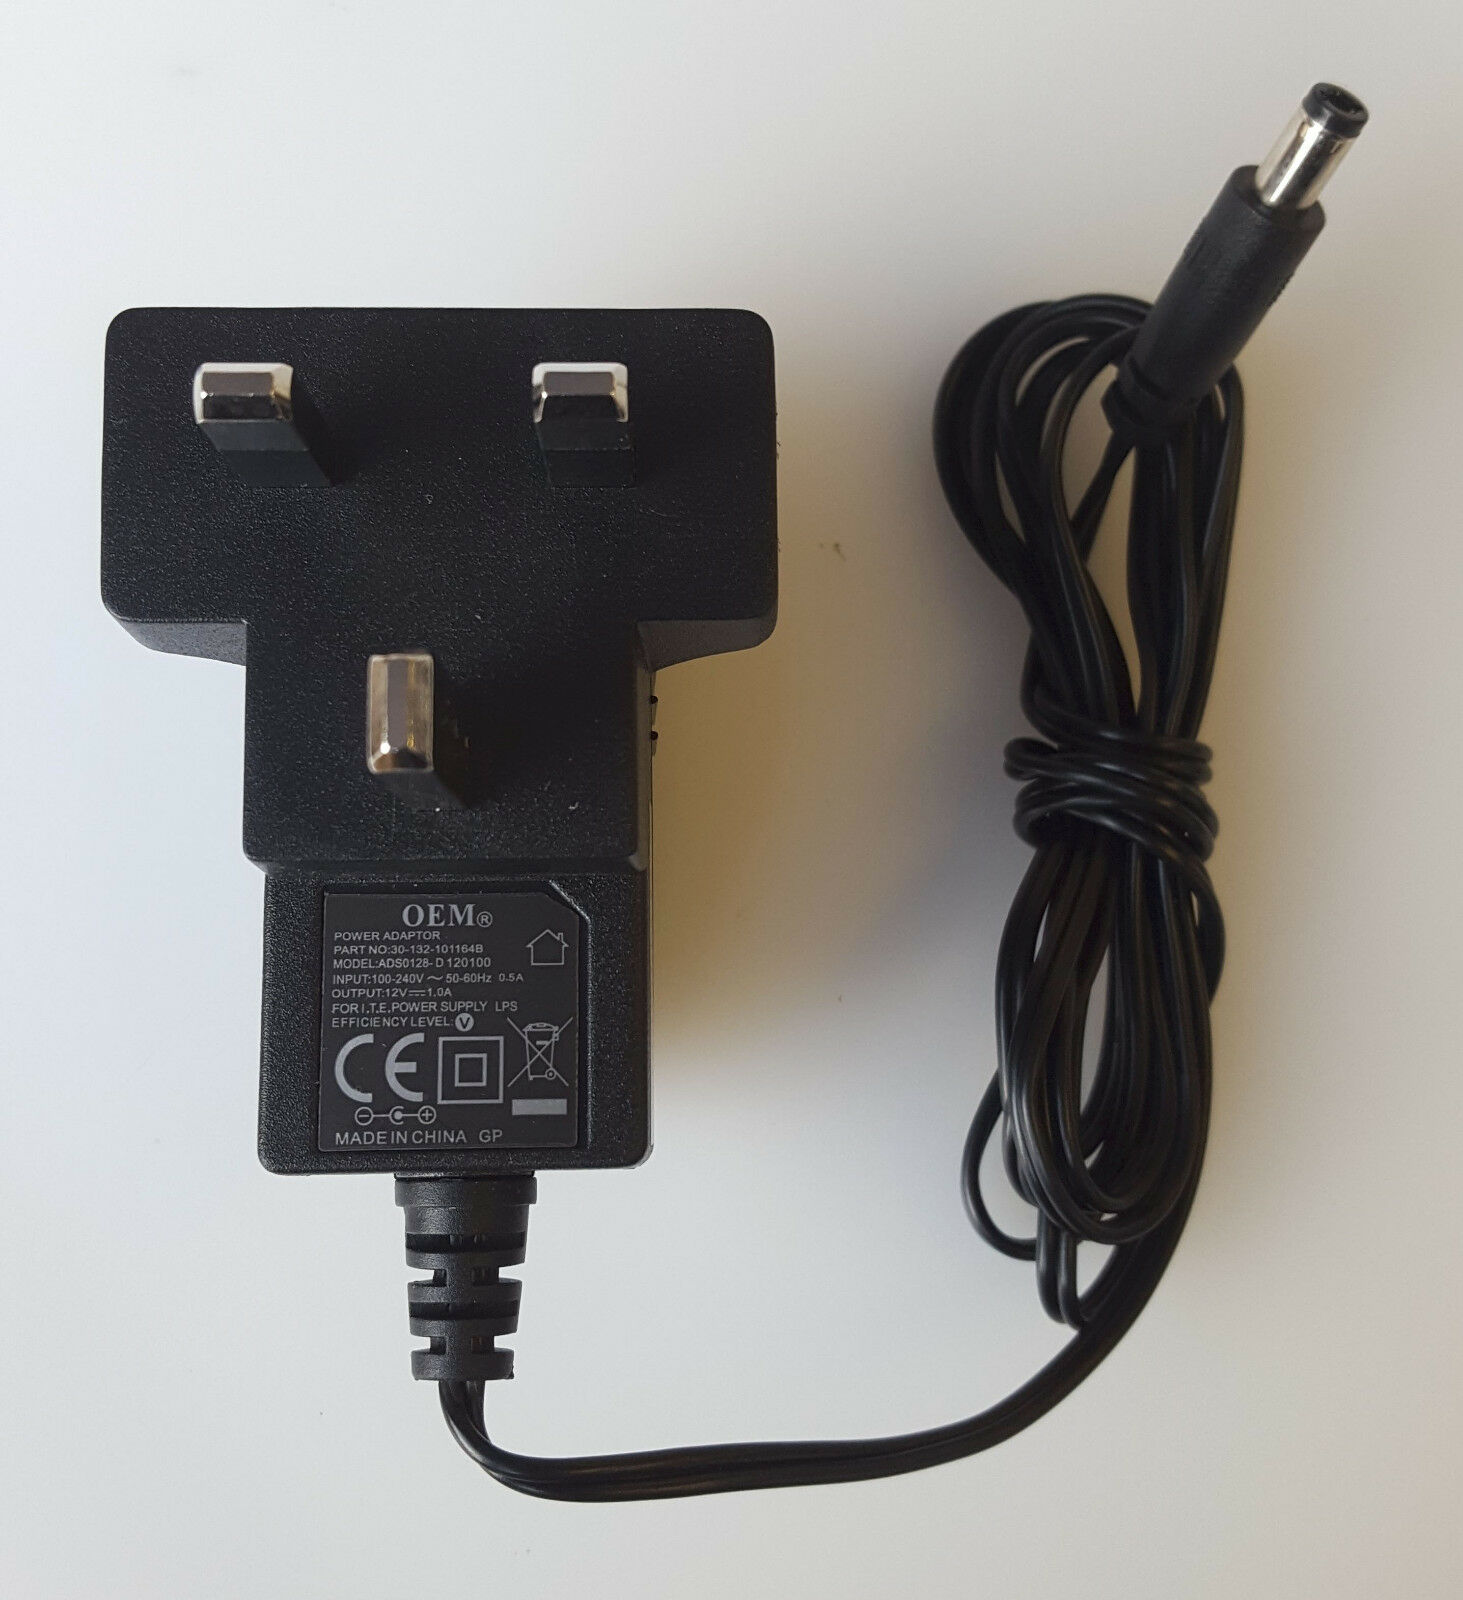 OEM ADS0128-D 120100 AC/DC POWER SUPPLY ADAPTER 12V 1.0A 30-132-101164B UK PLUG Country/Region of Manufacture: China O